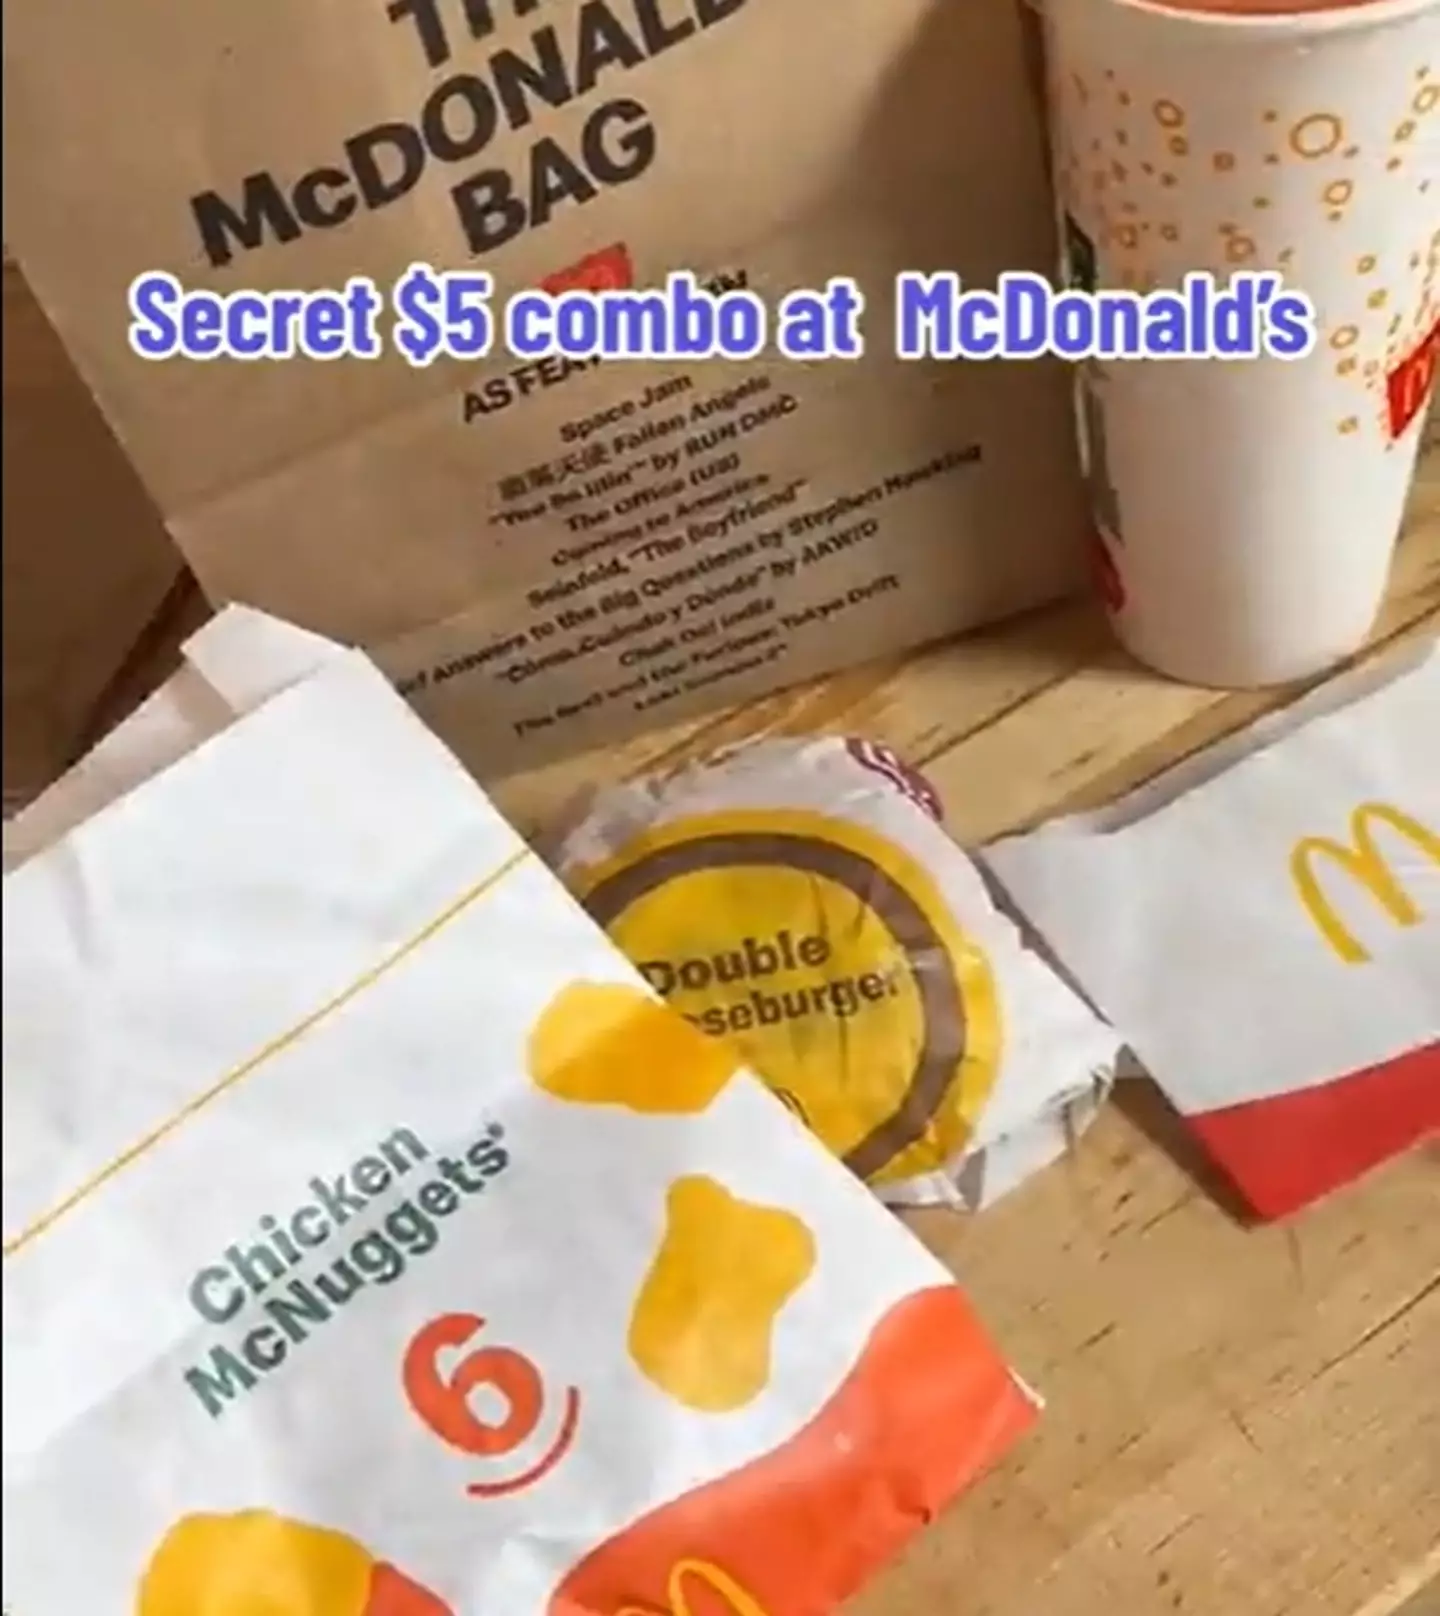 I know it says six on the bag but it's actually four McNuggets.